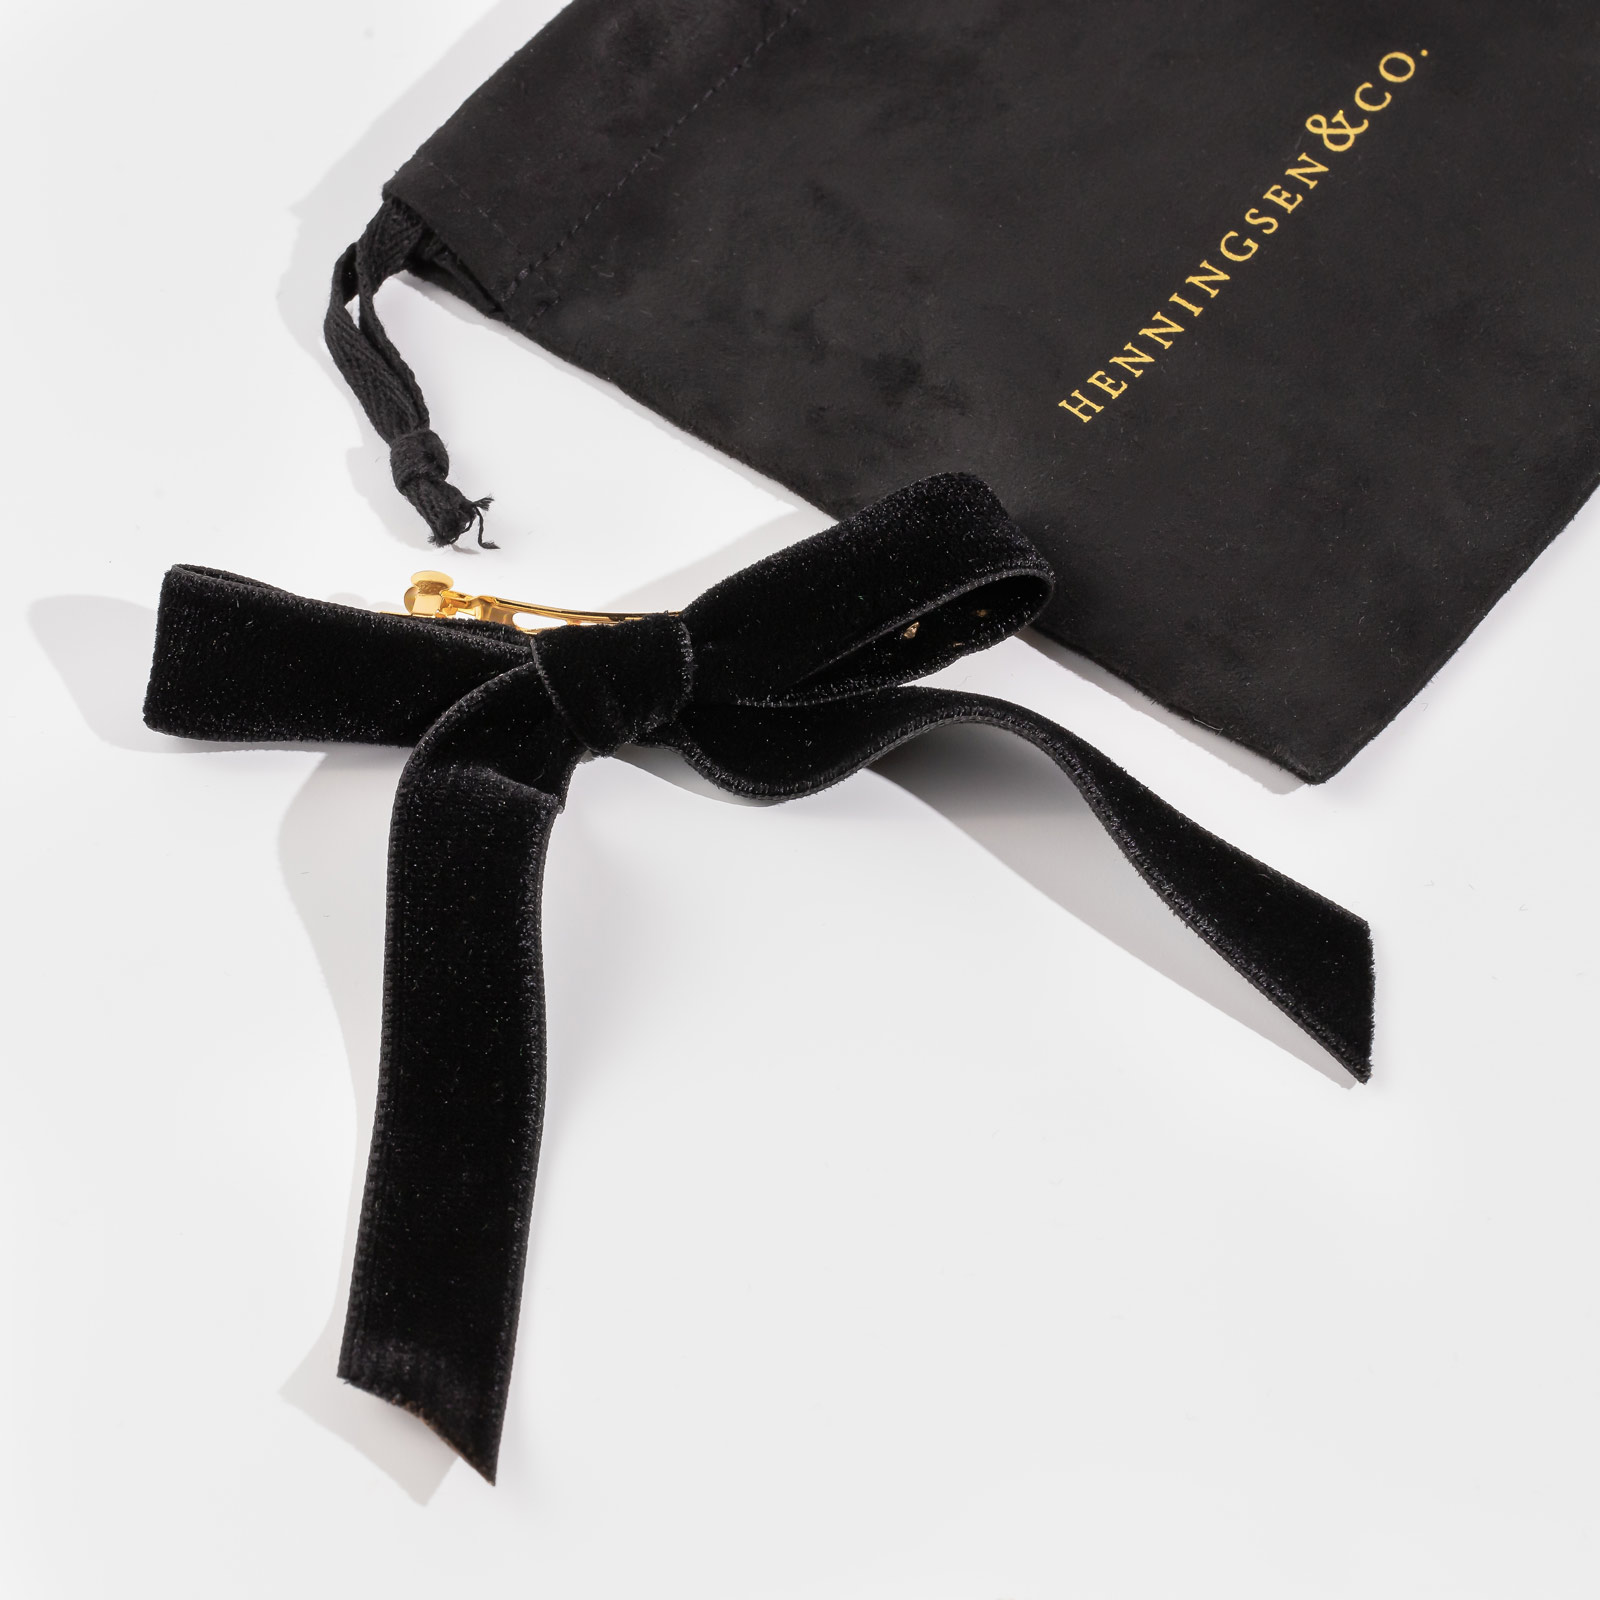 henningson and co black bardot bow and carrying bag on a white surface